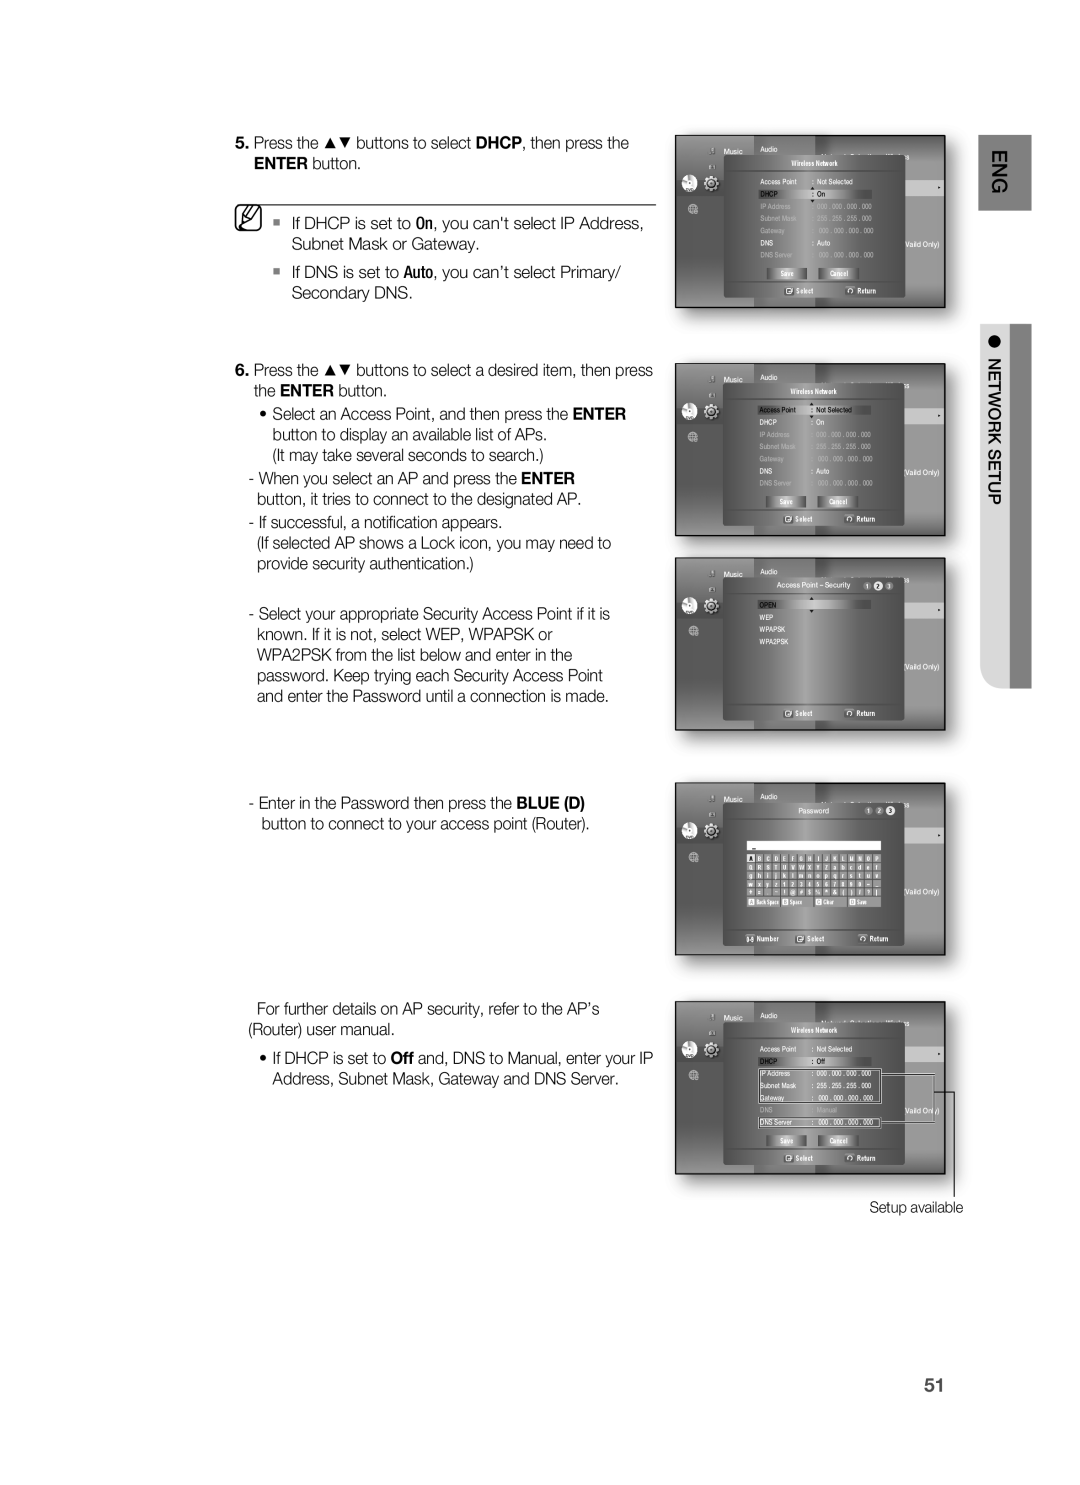 Samsung HT-BD8200 user manual It may take several seconds to search 